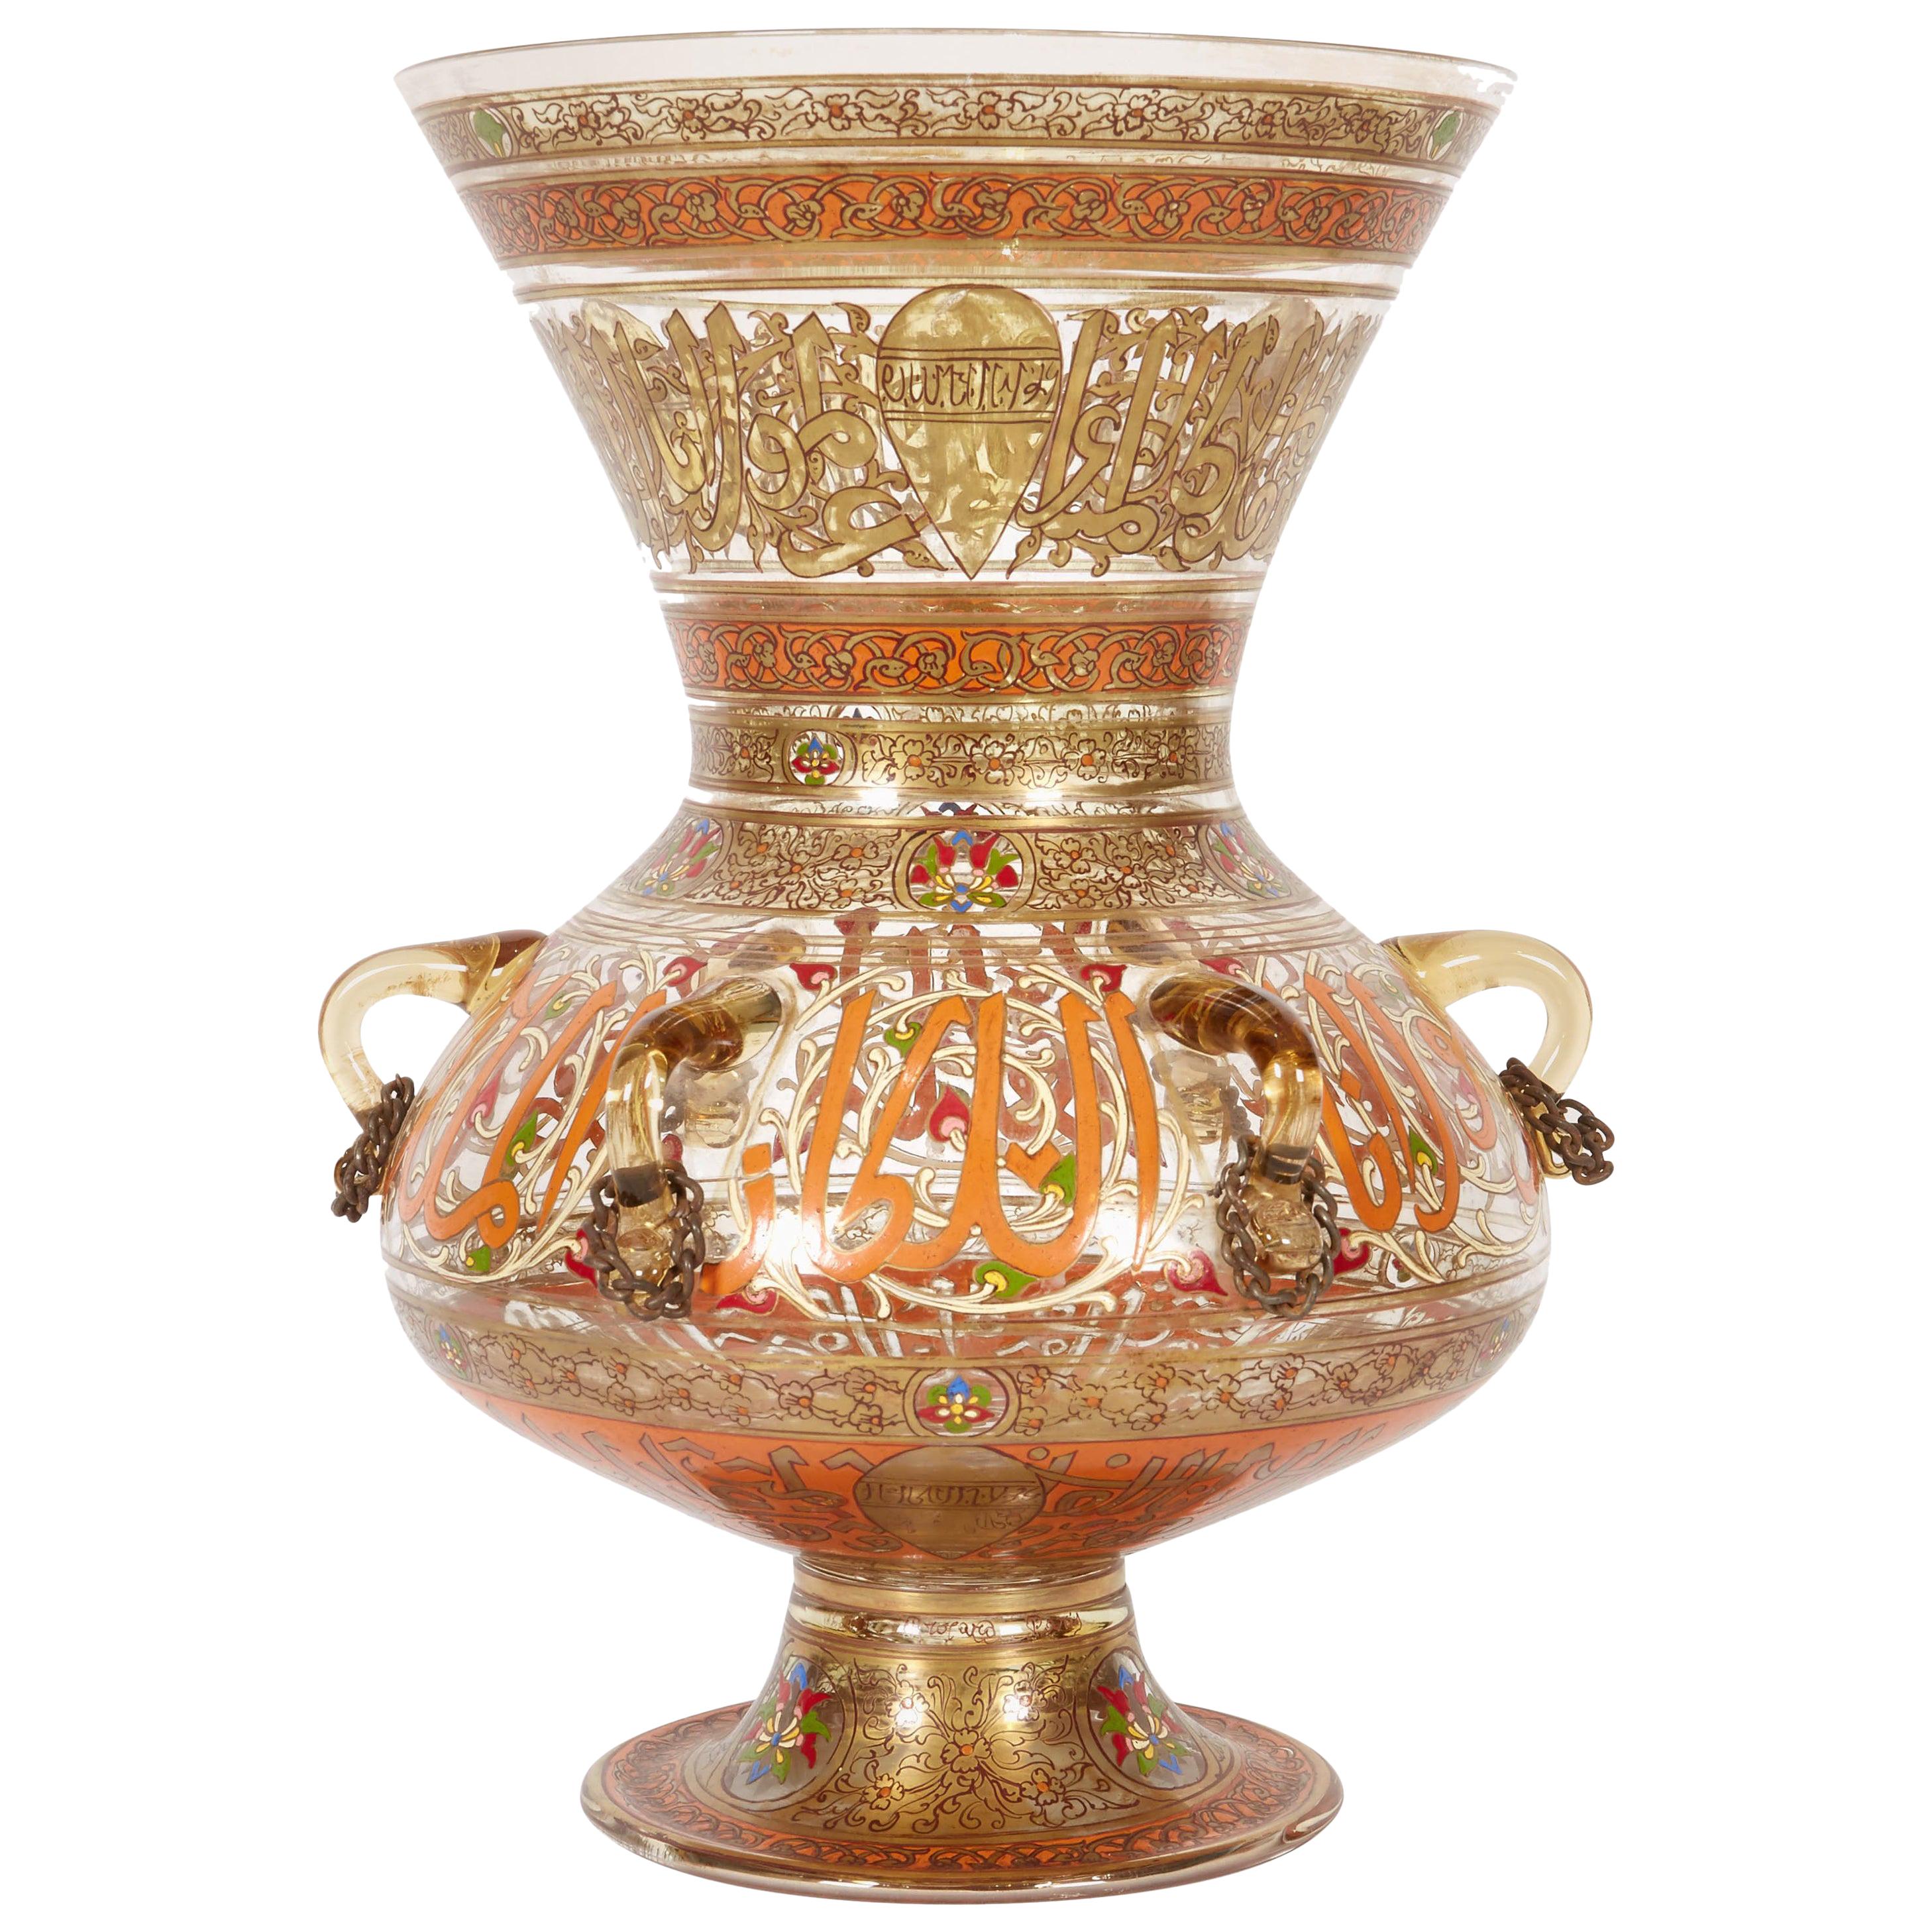 Rare French Enameled Mamluk Revival Glass Mosque Lamp by Philippe Joseph Brocard For Sale